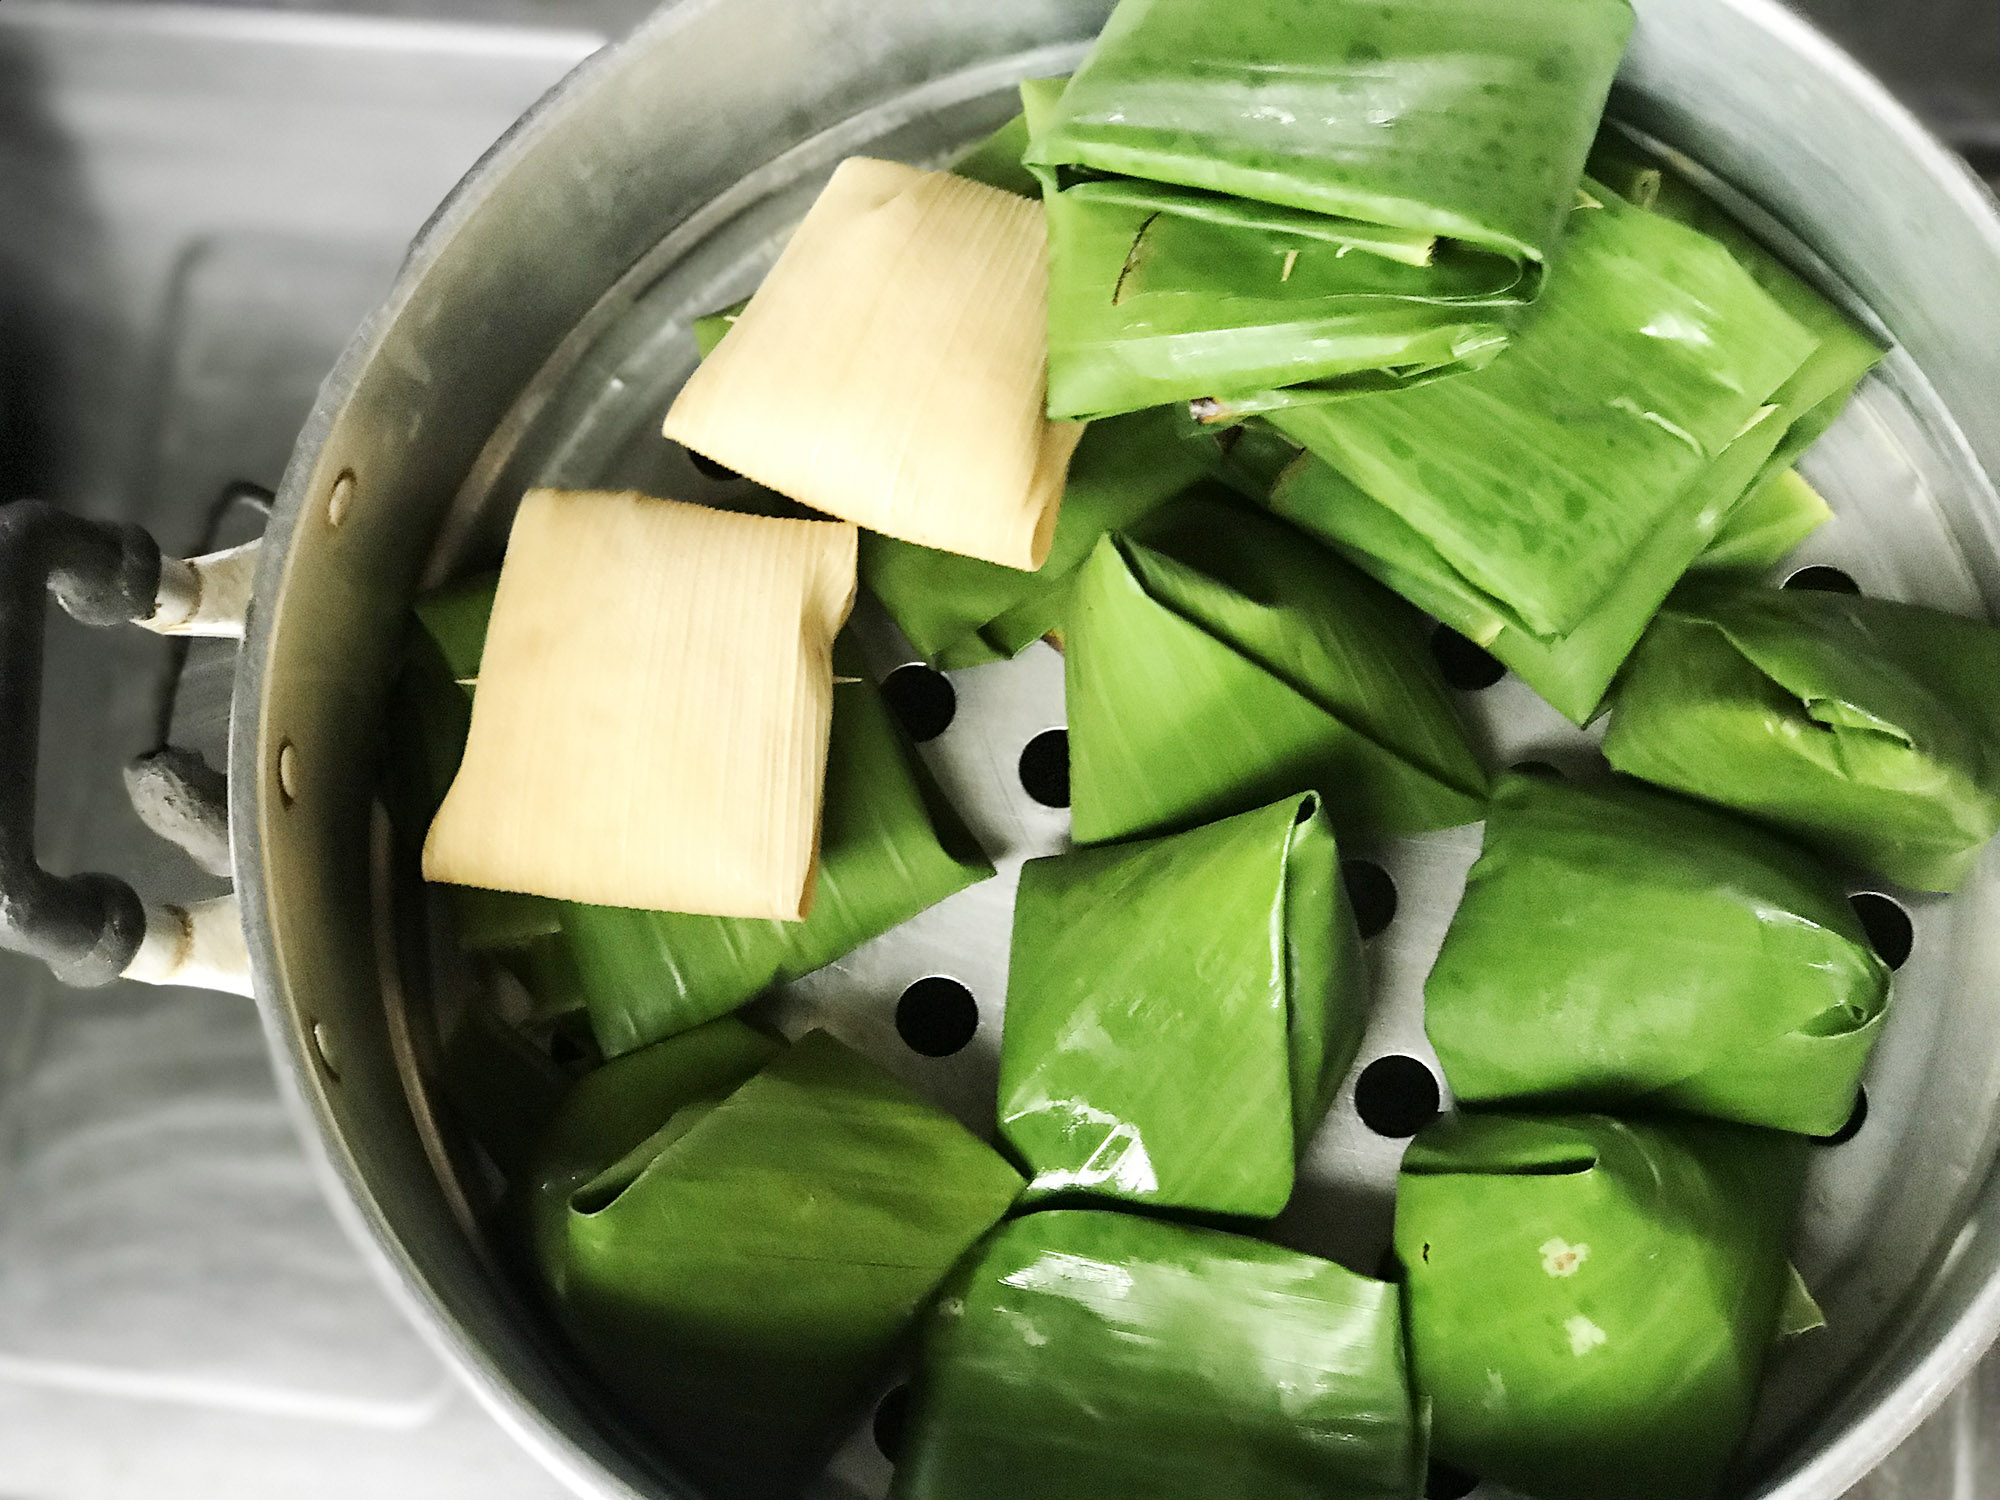 How to prepare banana leaves for cooking